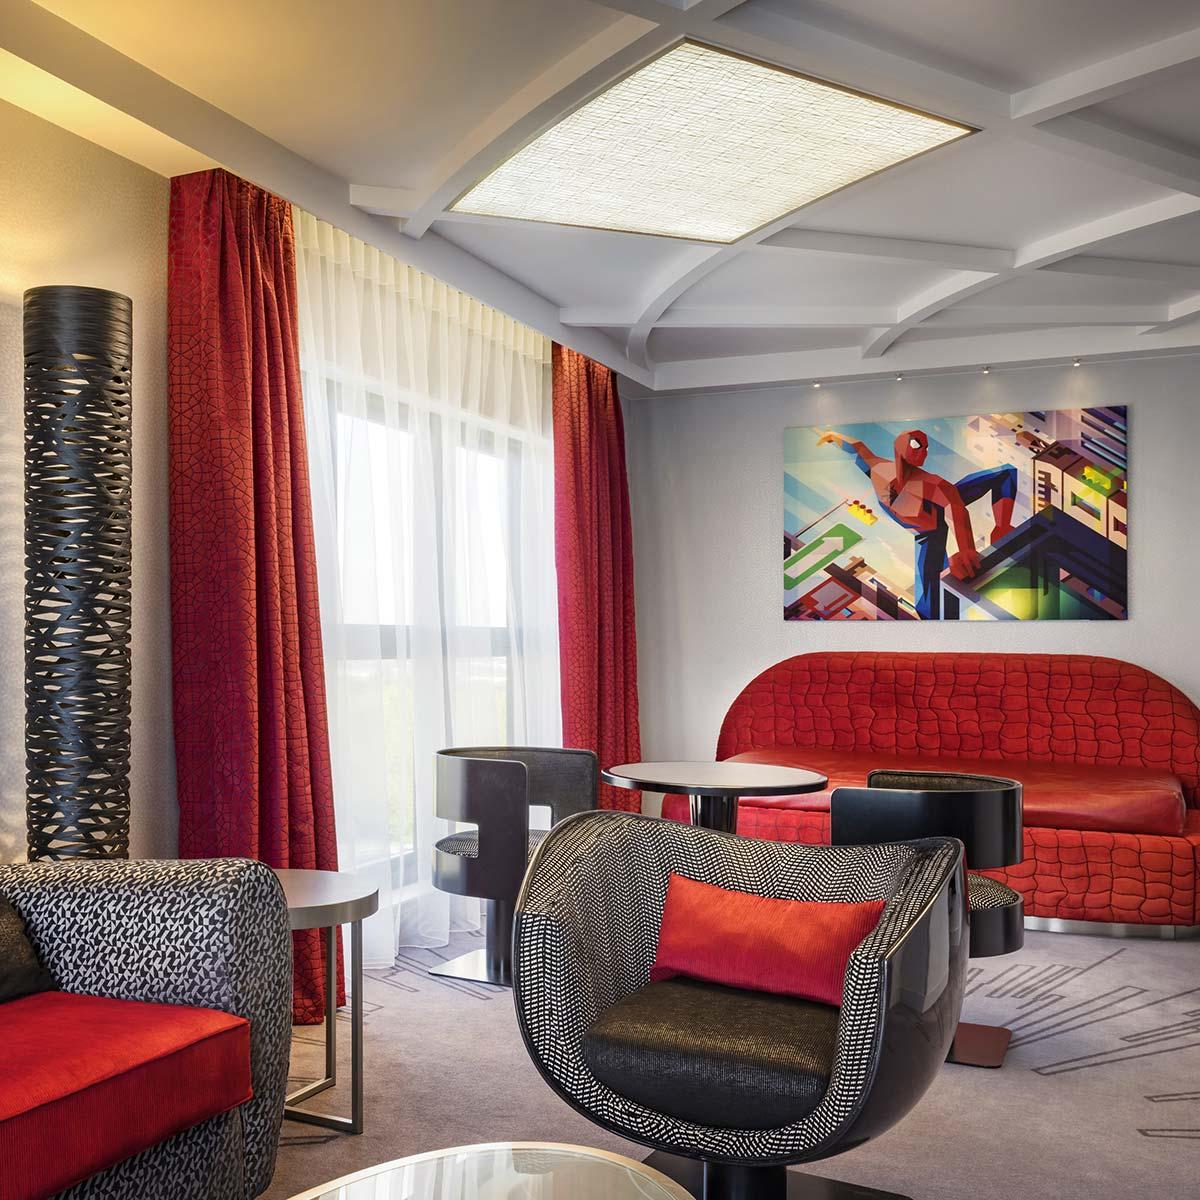 Club Rooms, Suites and a Club Lounge fit for Tony Stark